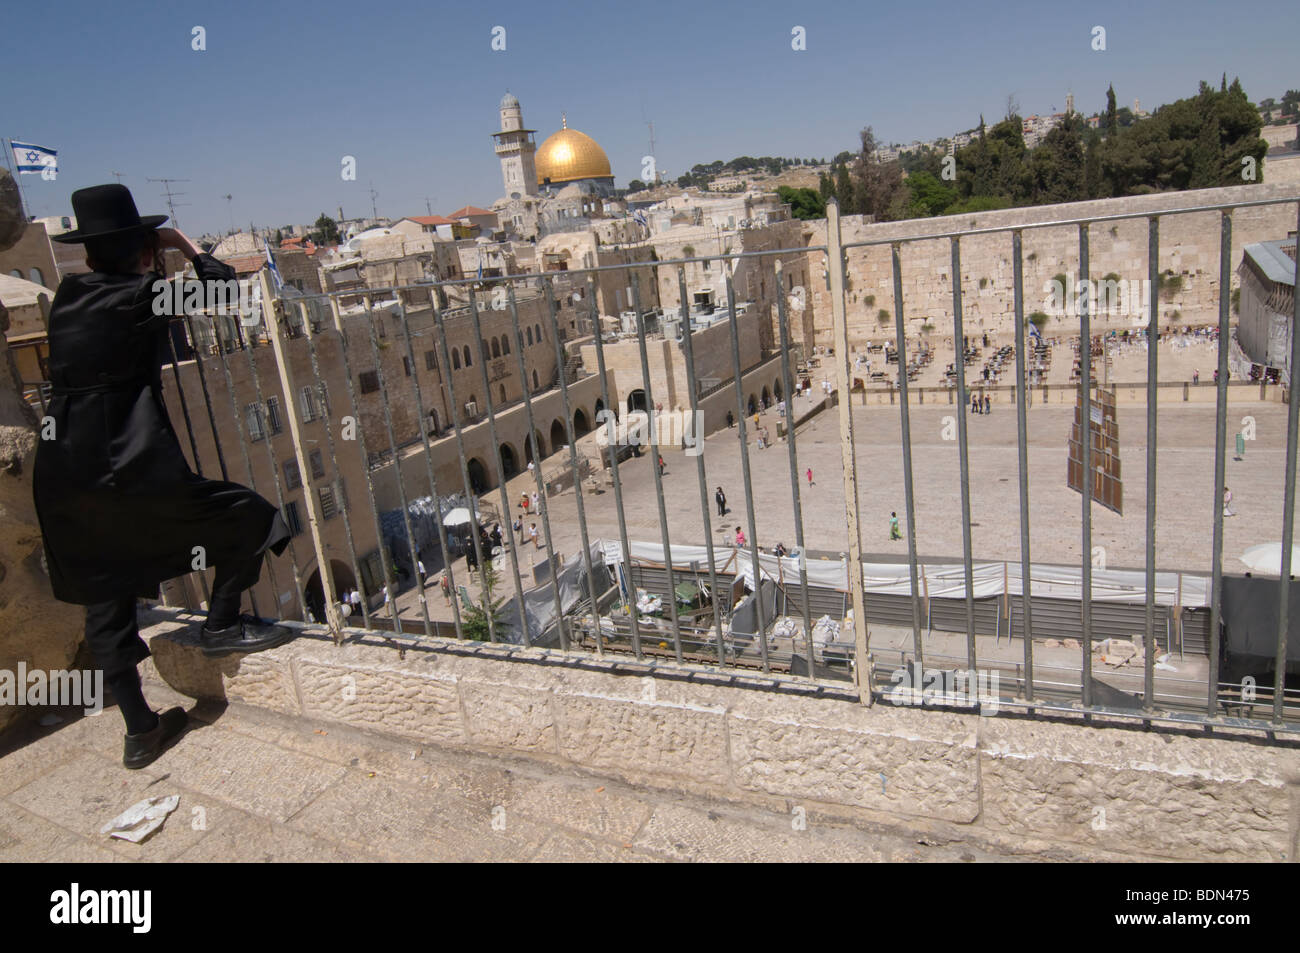 A Hasidic Jewish young man enjoys a panoramic view of the Western Wall and Al-Haram al-Sharif (Noble Sanctuary). Stock Photo